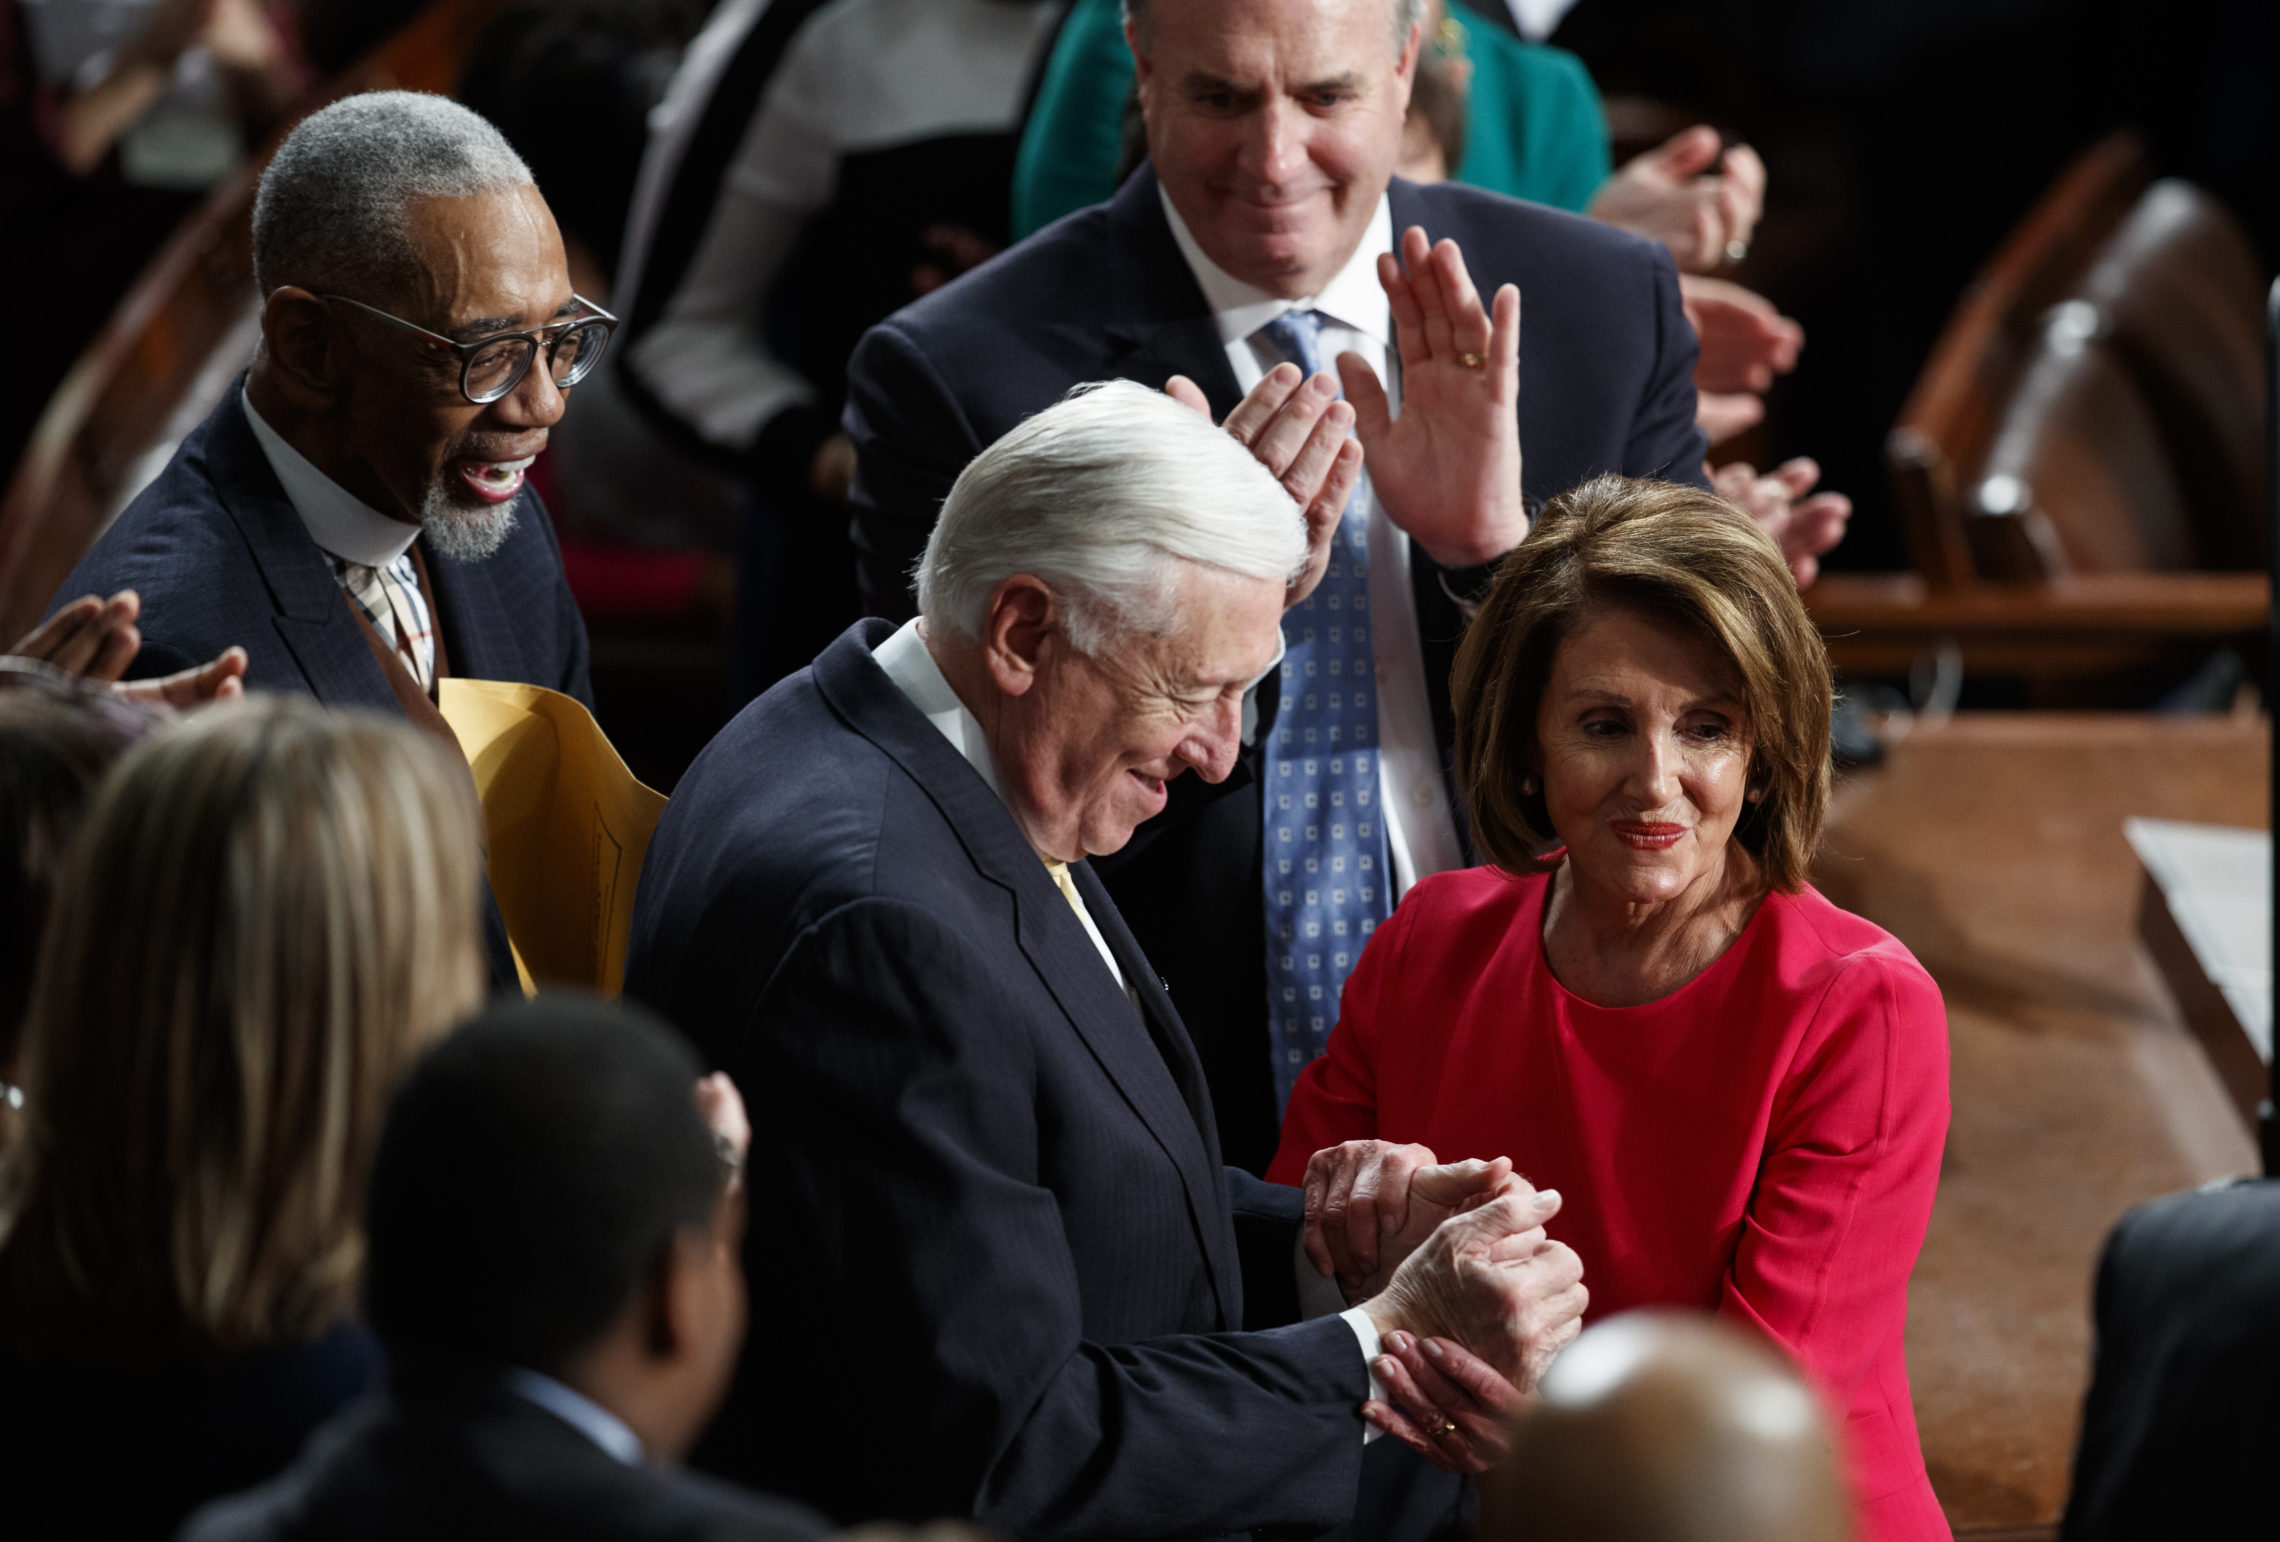 New Speaker of the House Nancy Pelosi, D-Calif., and House Majority Leader Steny Hoyer, D-Md., are applauded at the Capitol on Thursday as Democrats officially regain control of the chamber. CREDIT: CAROLYN KASTER/AP